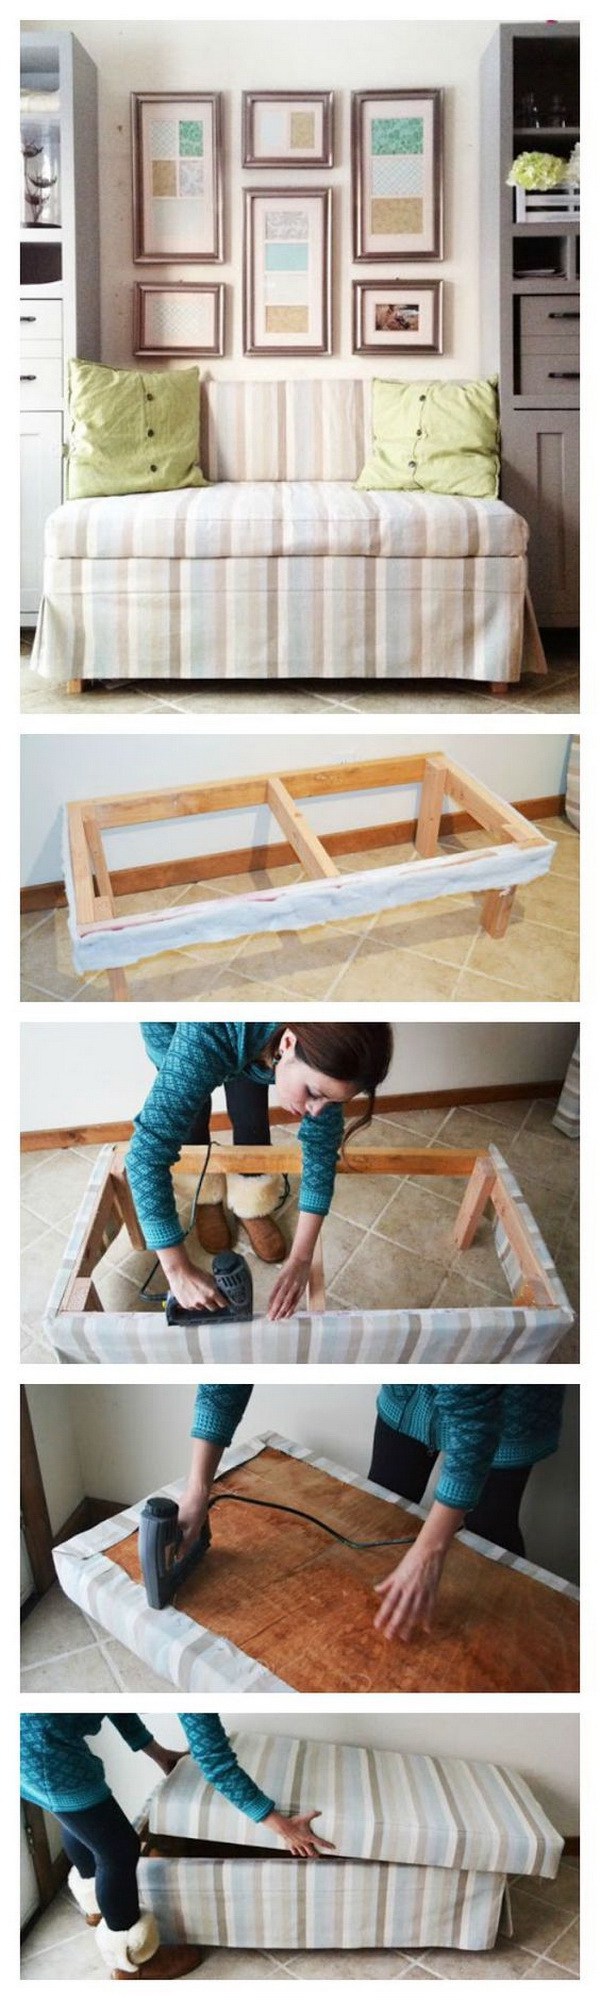 DIY 2x4 Upholstered Banquette Seat: Free step by step plans to build this upholstered banquette seat. 